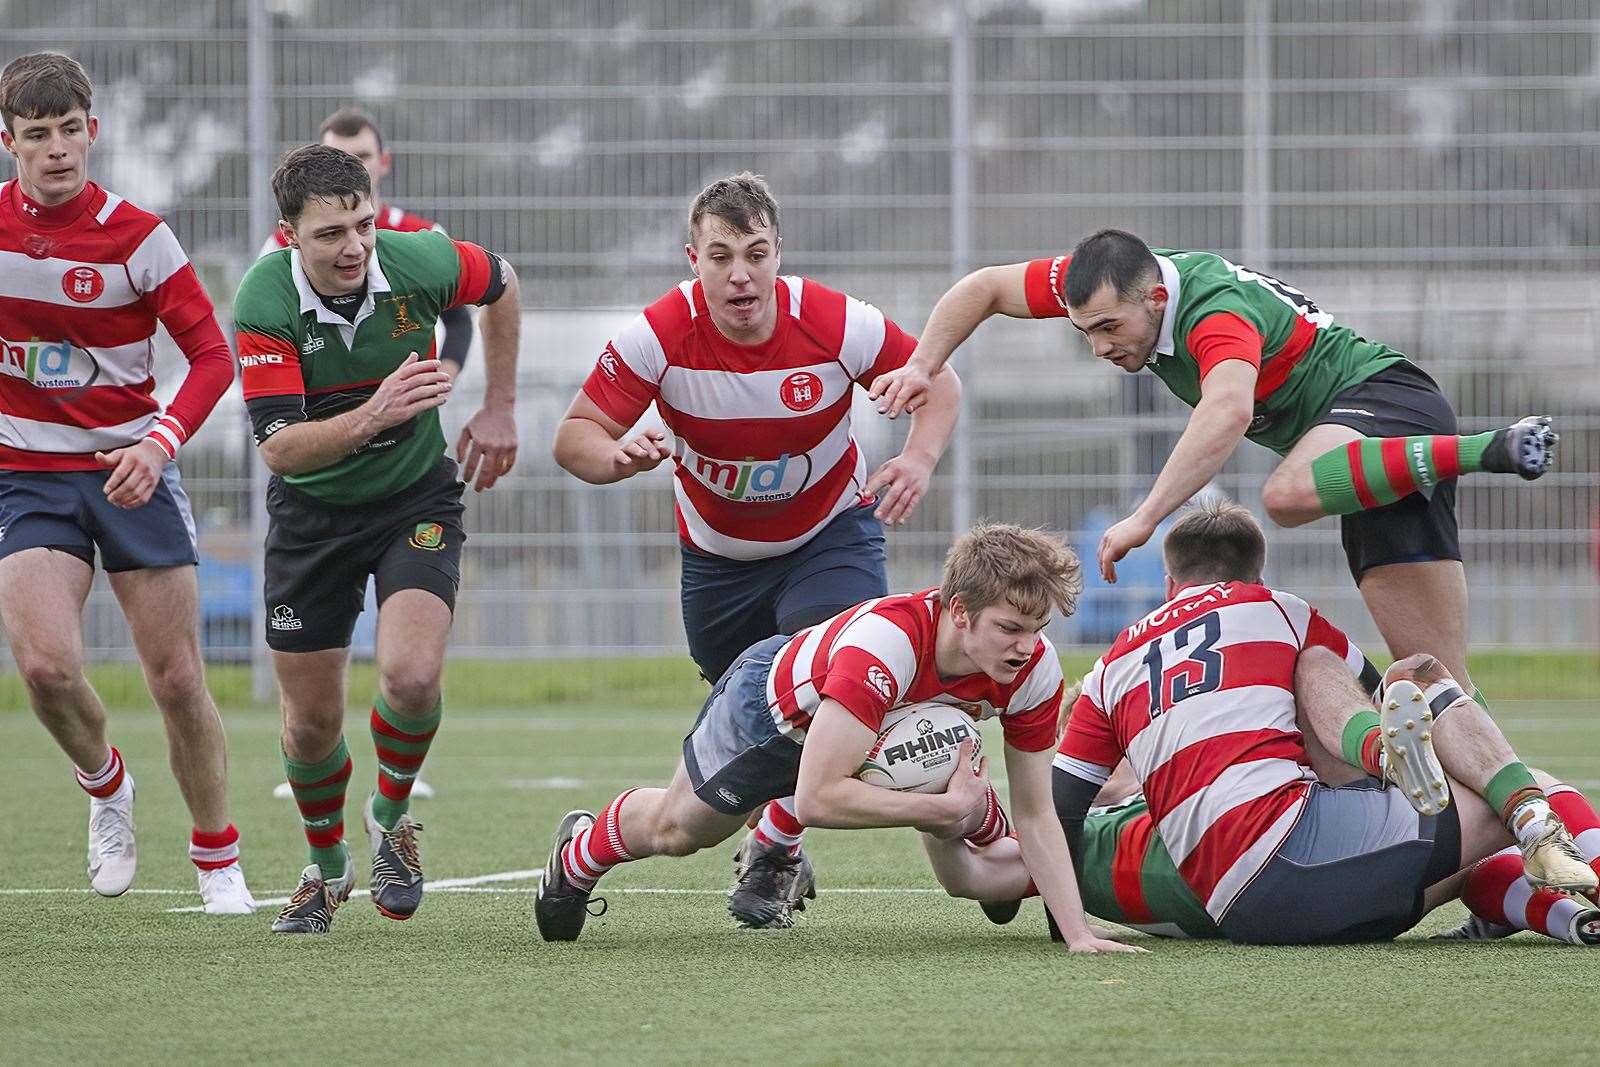 Tom Letch with the ball for Moray accompanied by team-mates Rory Millar and Cameron Hughes. Photo: John Macgregor